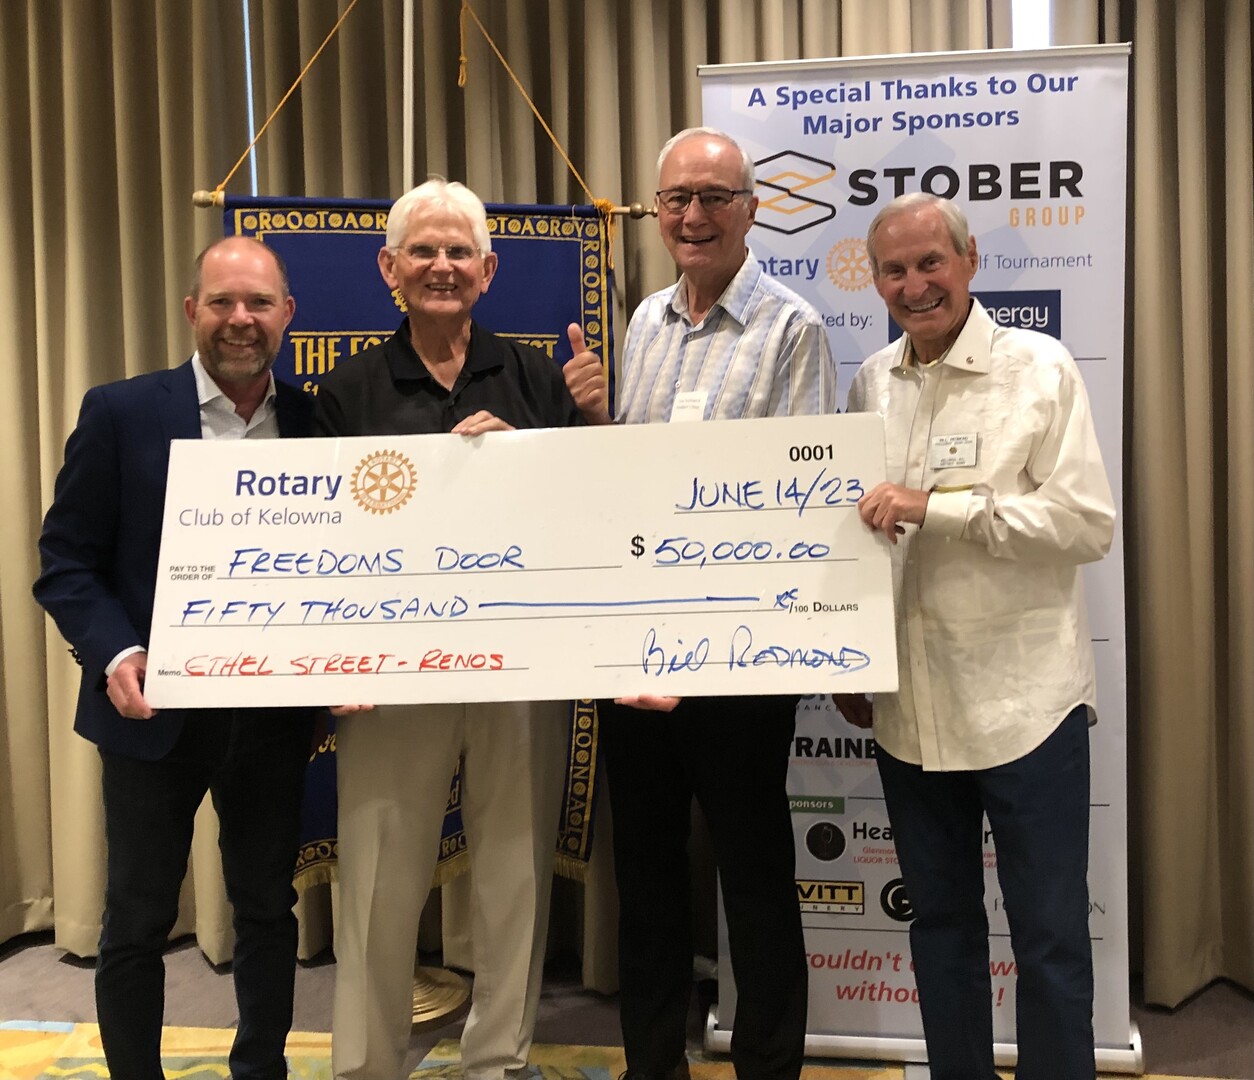 Thank you to the Rotary Club of Kelowna